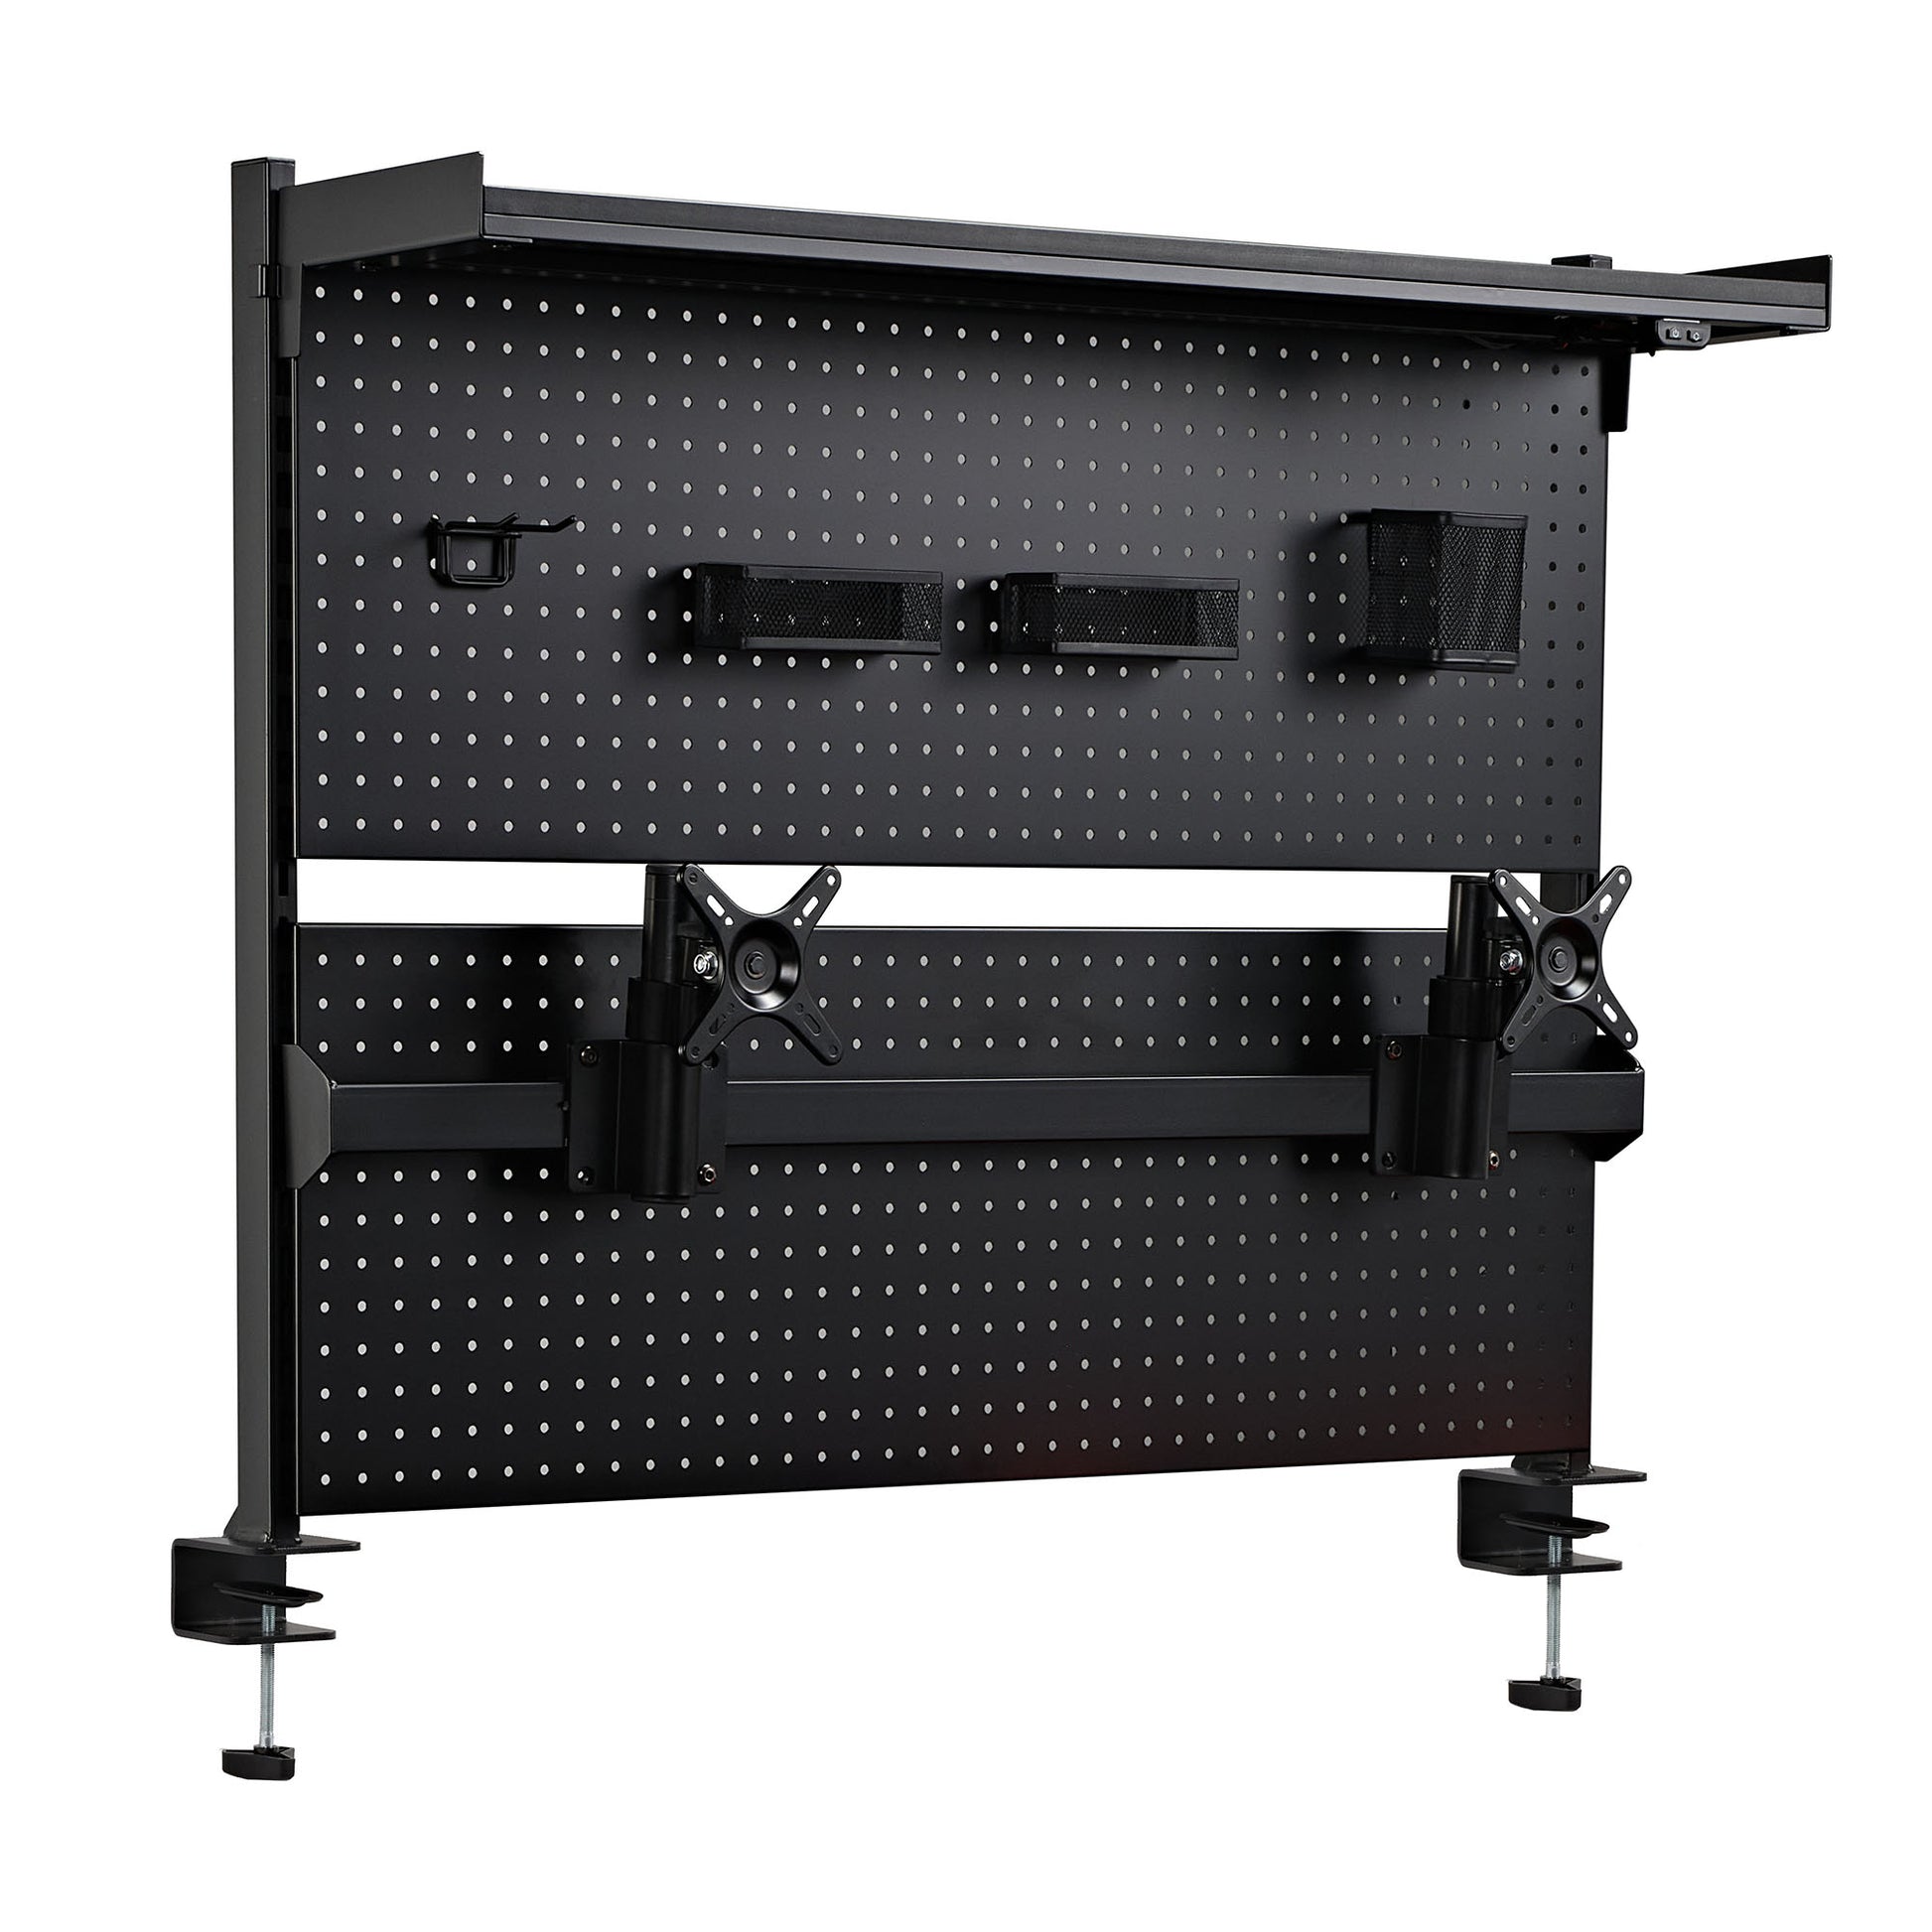 Clamp-on desk pegboard with dual monitor mount